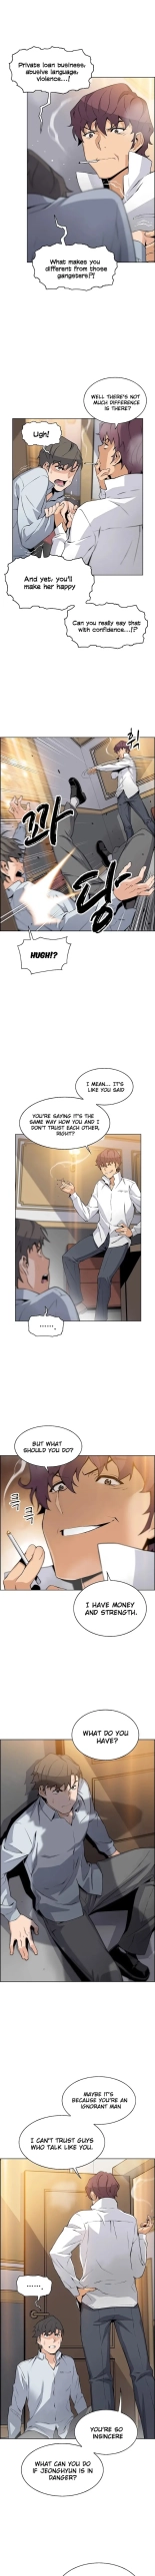 Housekeeper  Ch.4949   Completed : page 404